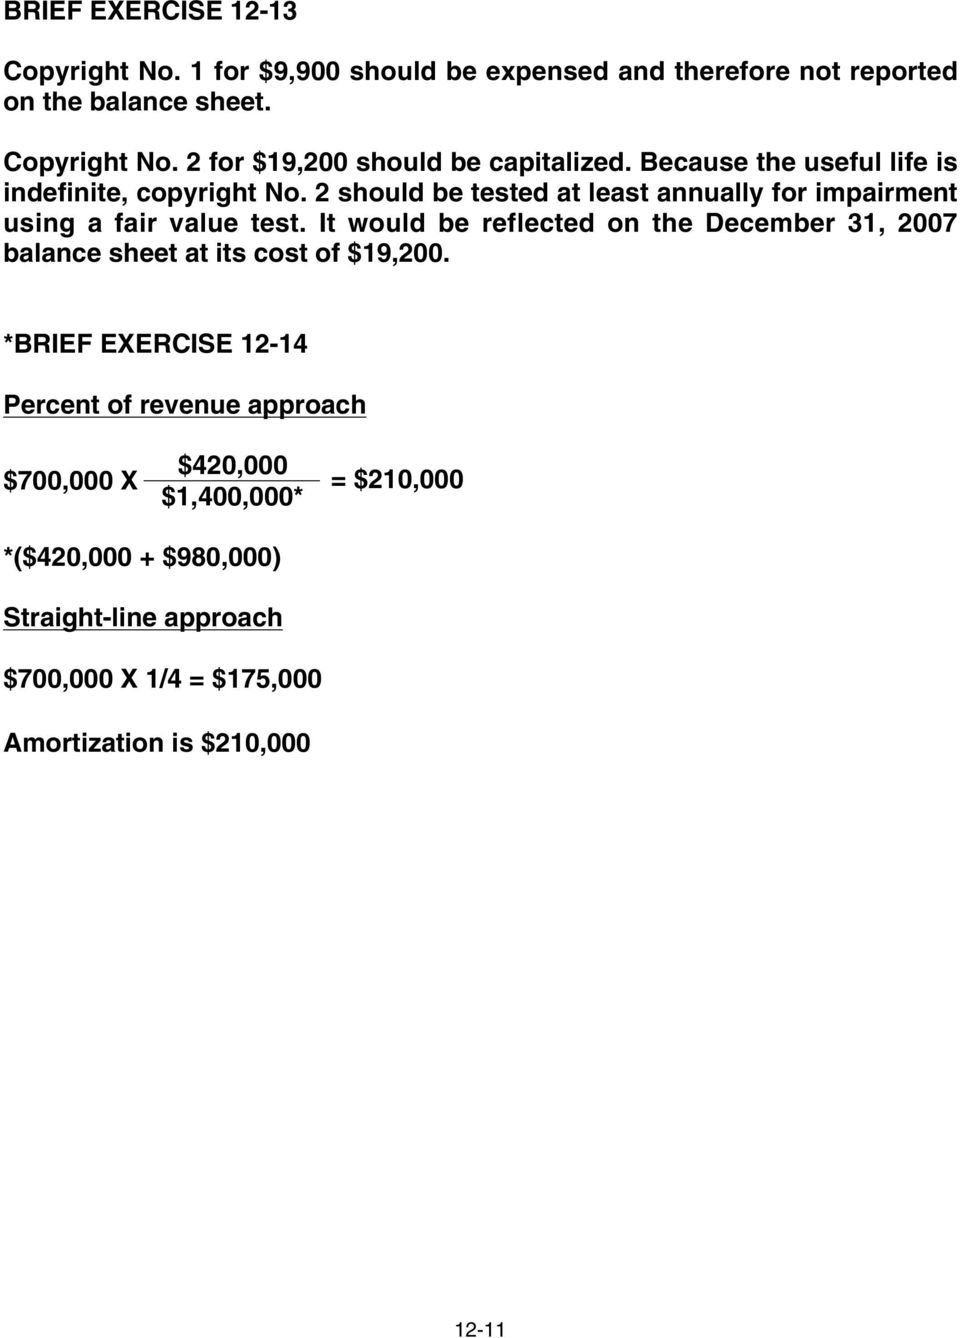 It would be reflected on the December 31, 2007 balance sheet at its cost of $19,200.